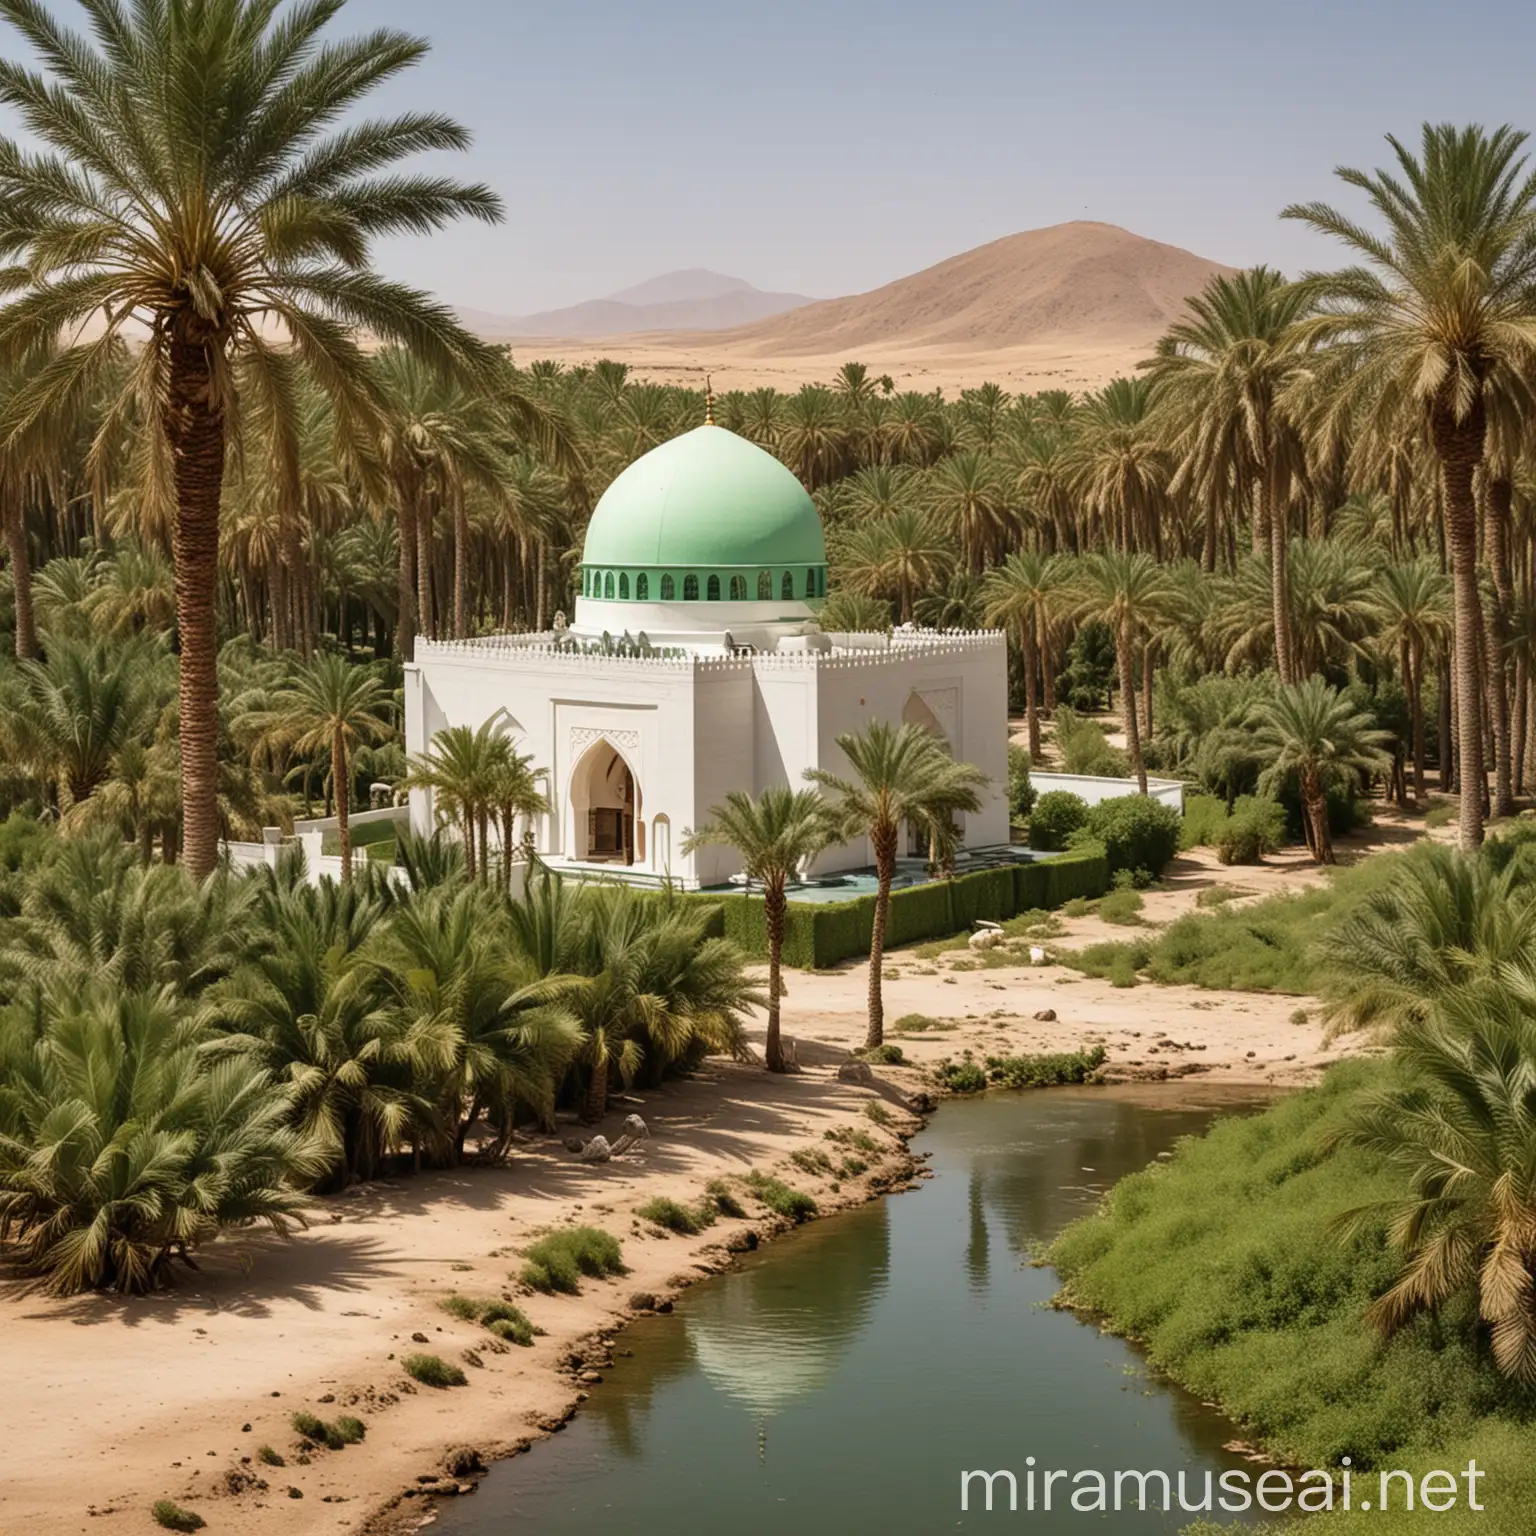 A mosque above which is a green and high dome with a white flag on it in the middle of a desert and surrounded by palm trees and a small river.